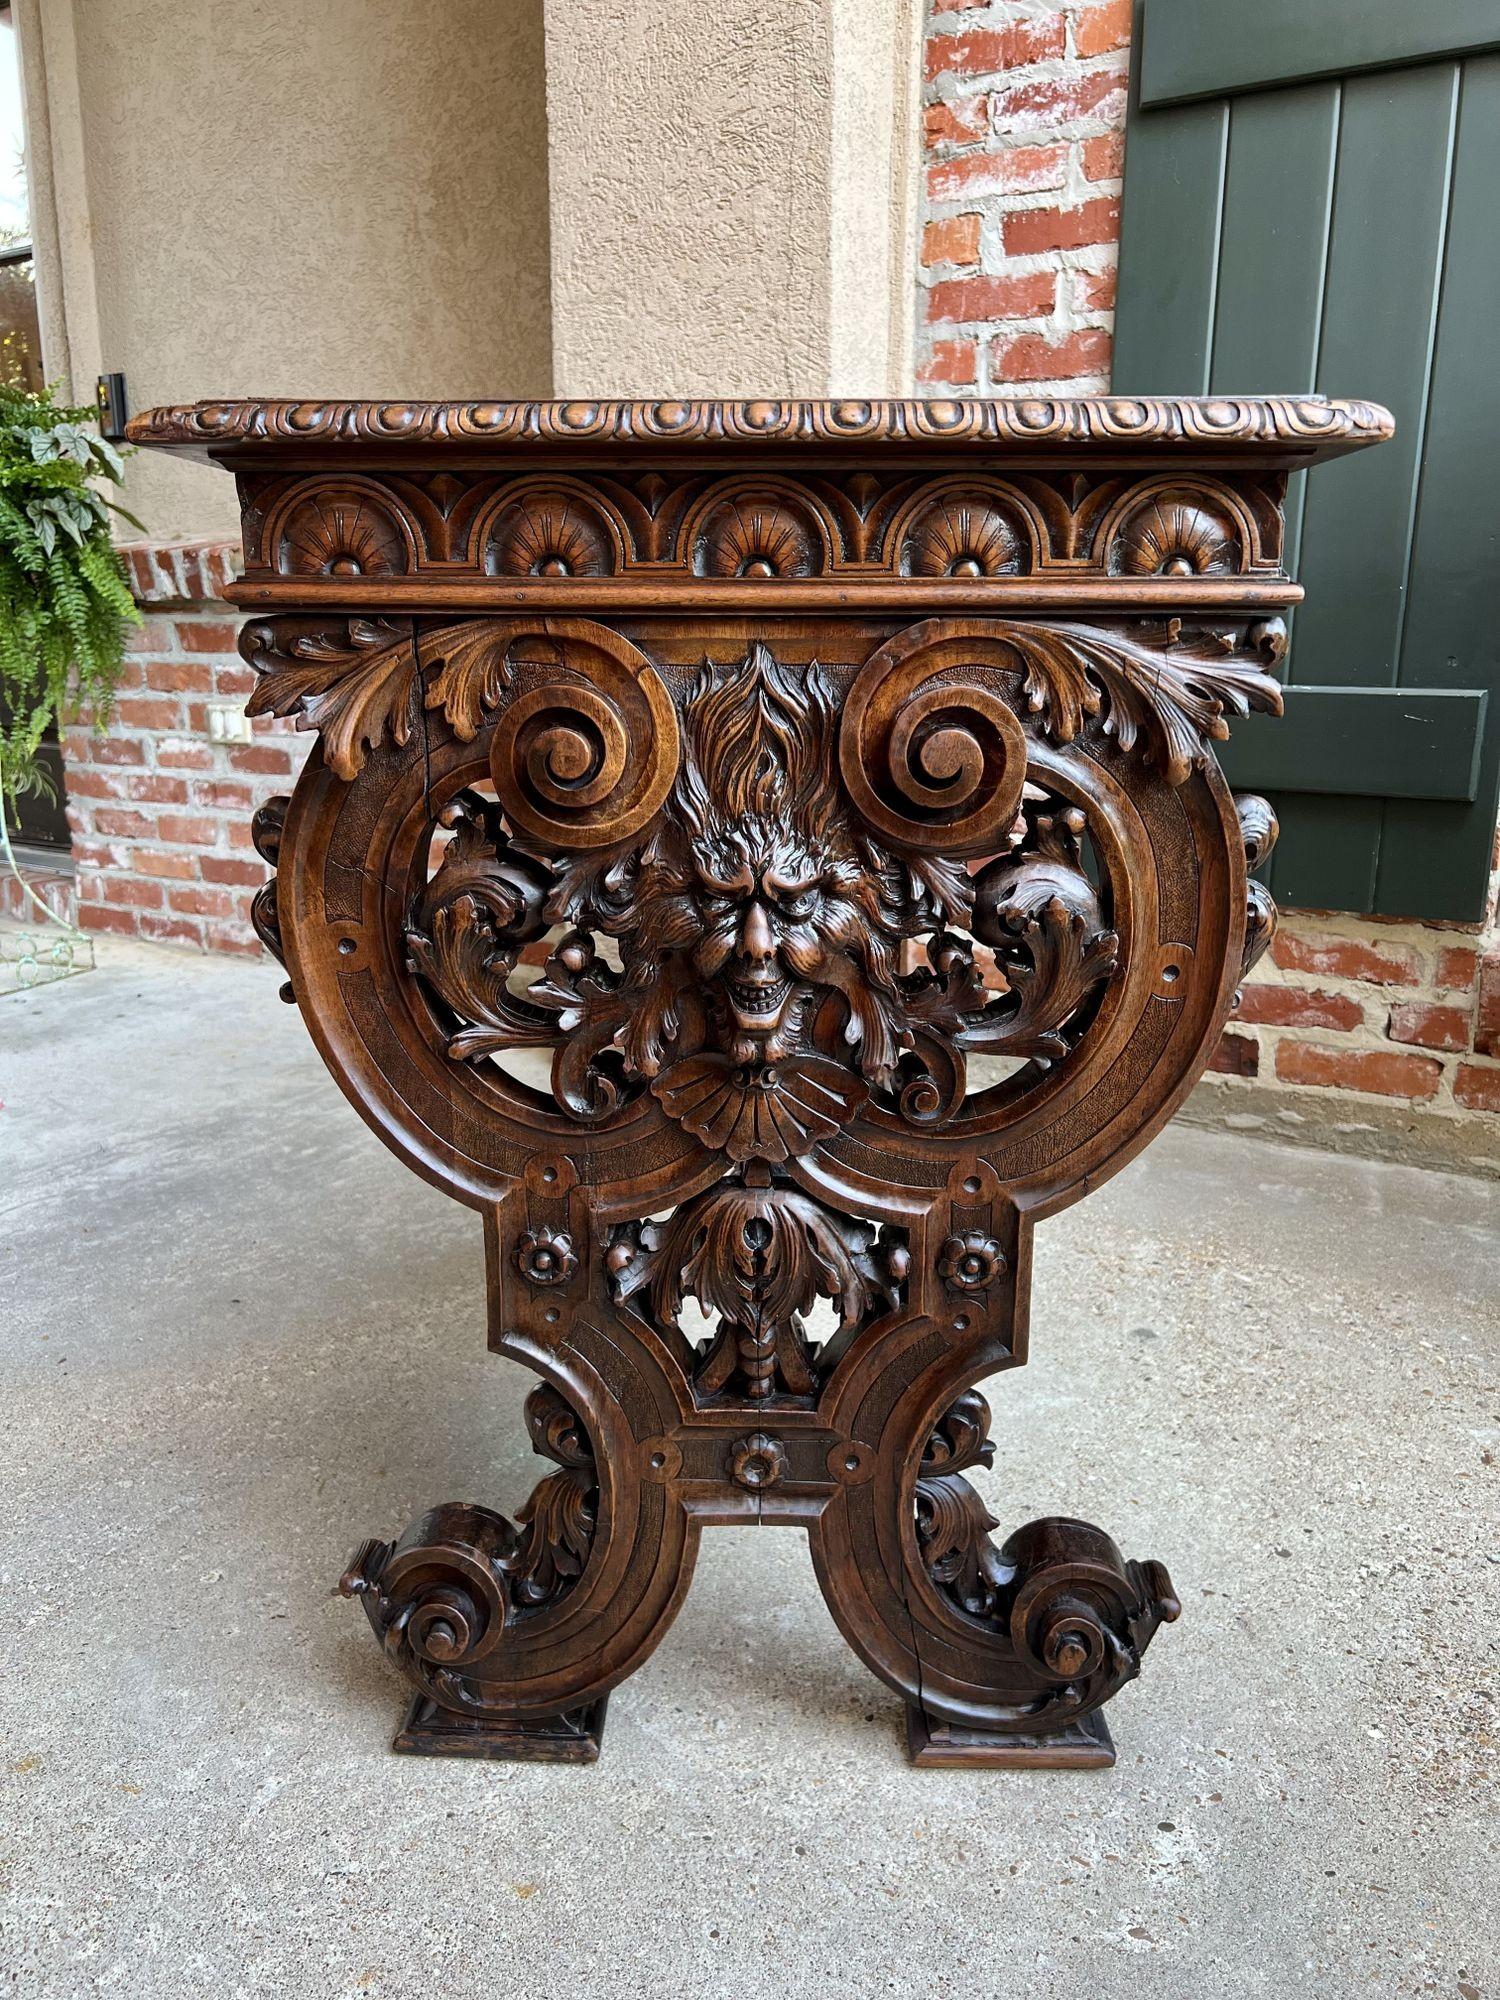 19th Century French console sofa table Louis XIV style carved walnut w Lyre Scrolls.
 
Direct from France, a highly carved 19th century sofa table, opulently carved on both the exterior and interior sides of the trestle legs.
Carvings of scrolls and